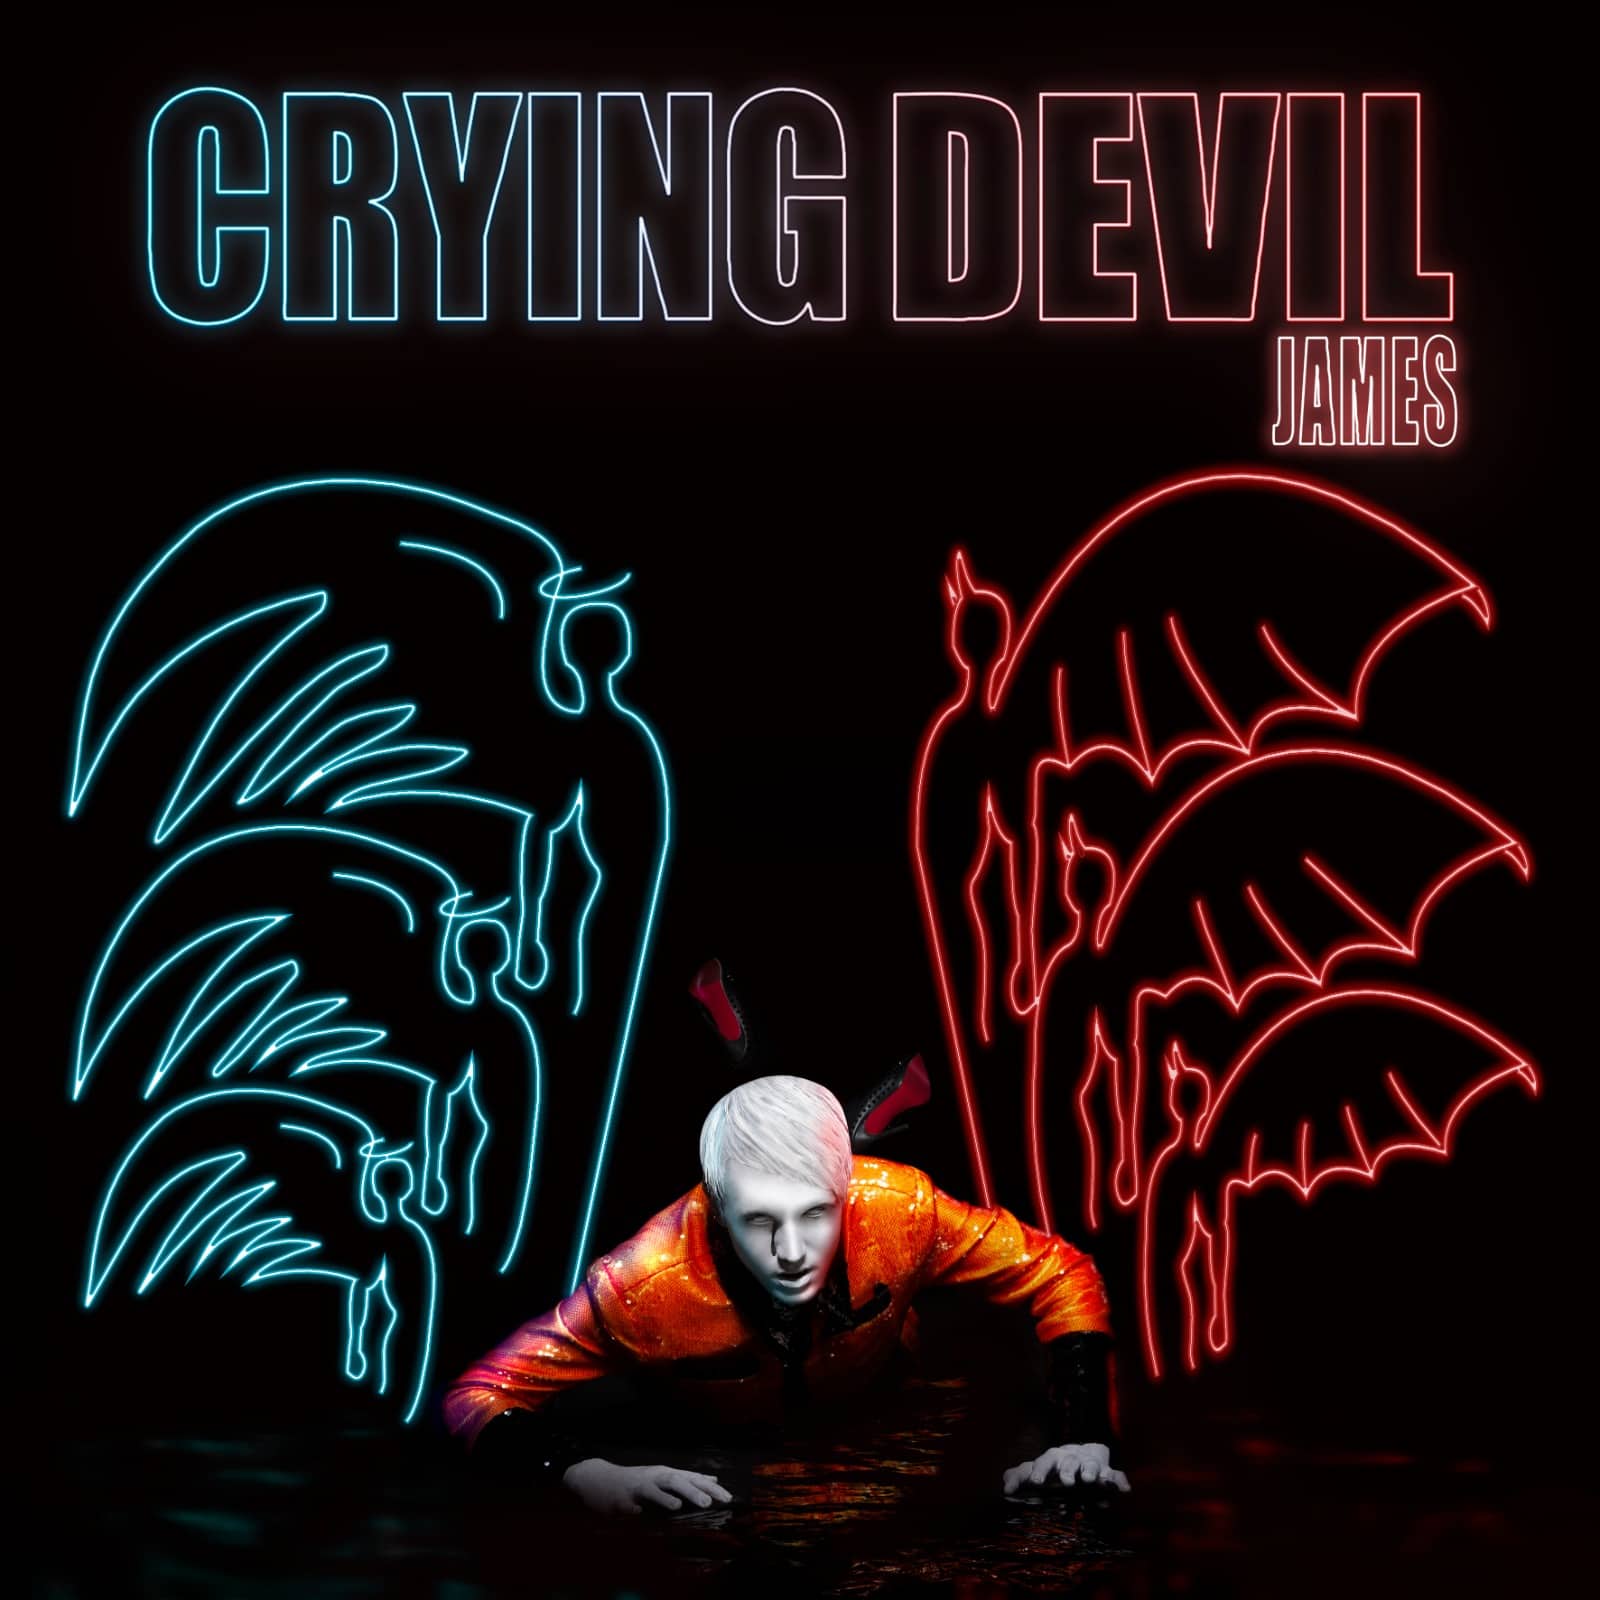 JamesDJJ releases "Crying Devil", seems that the new album is ready